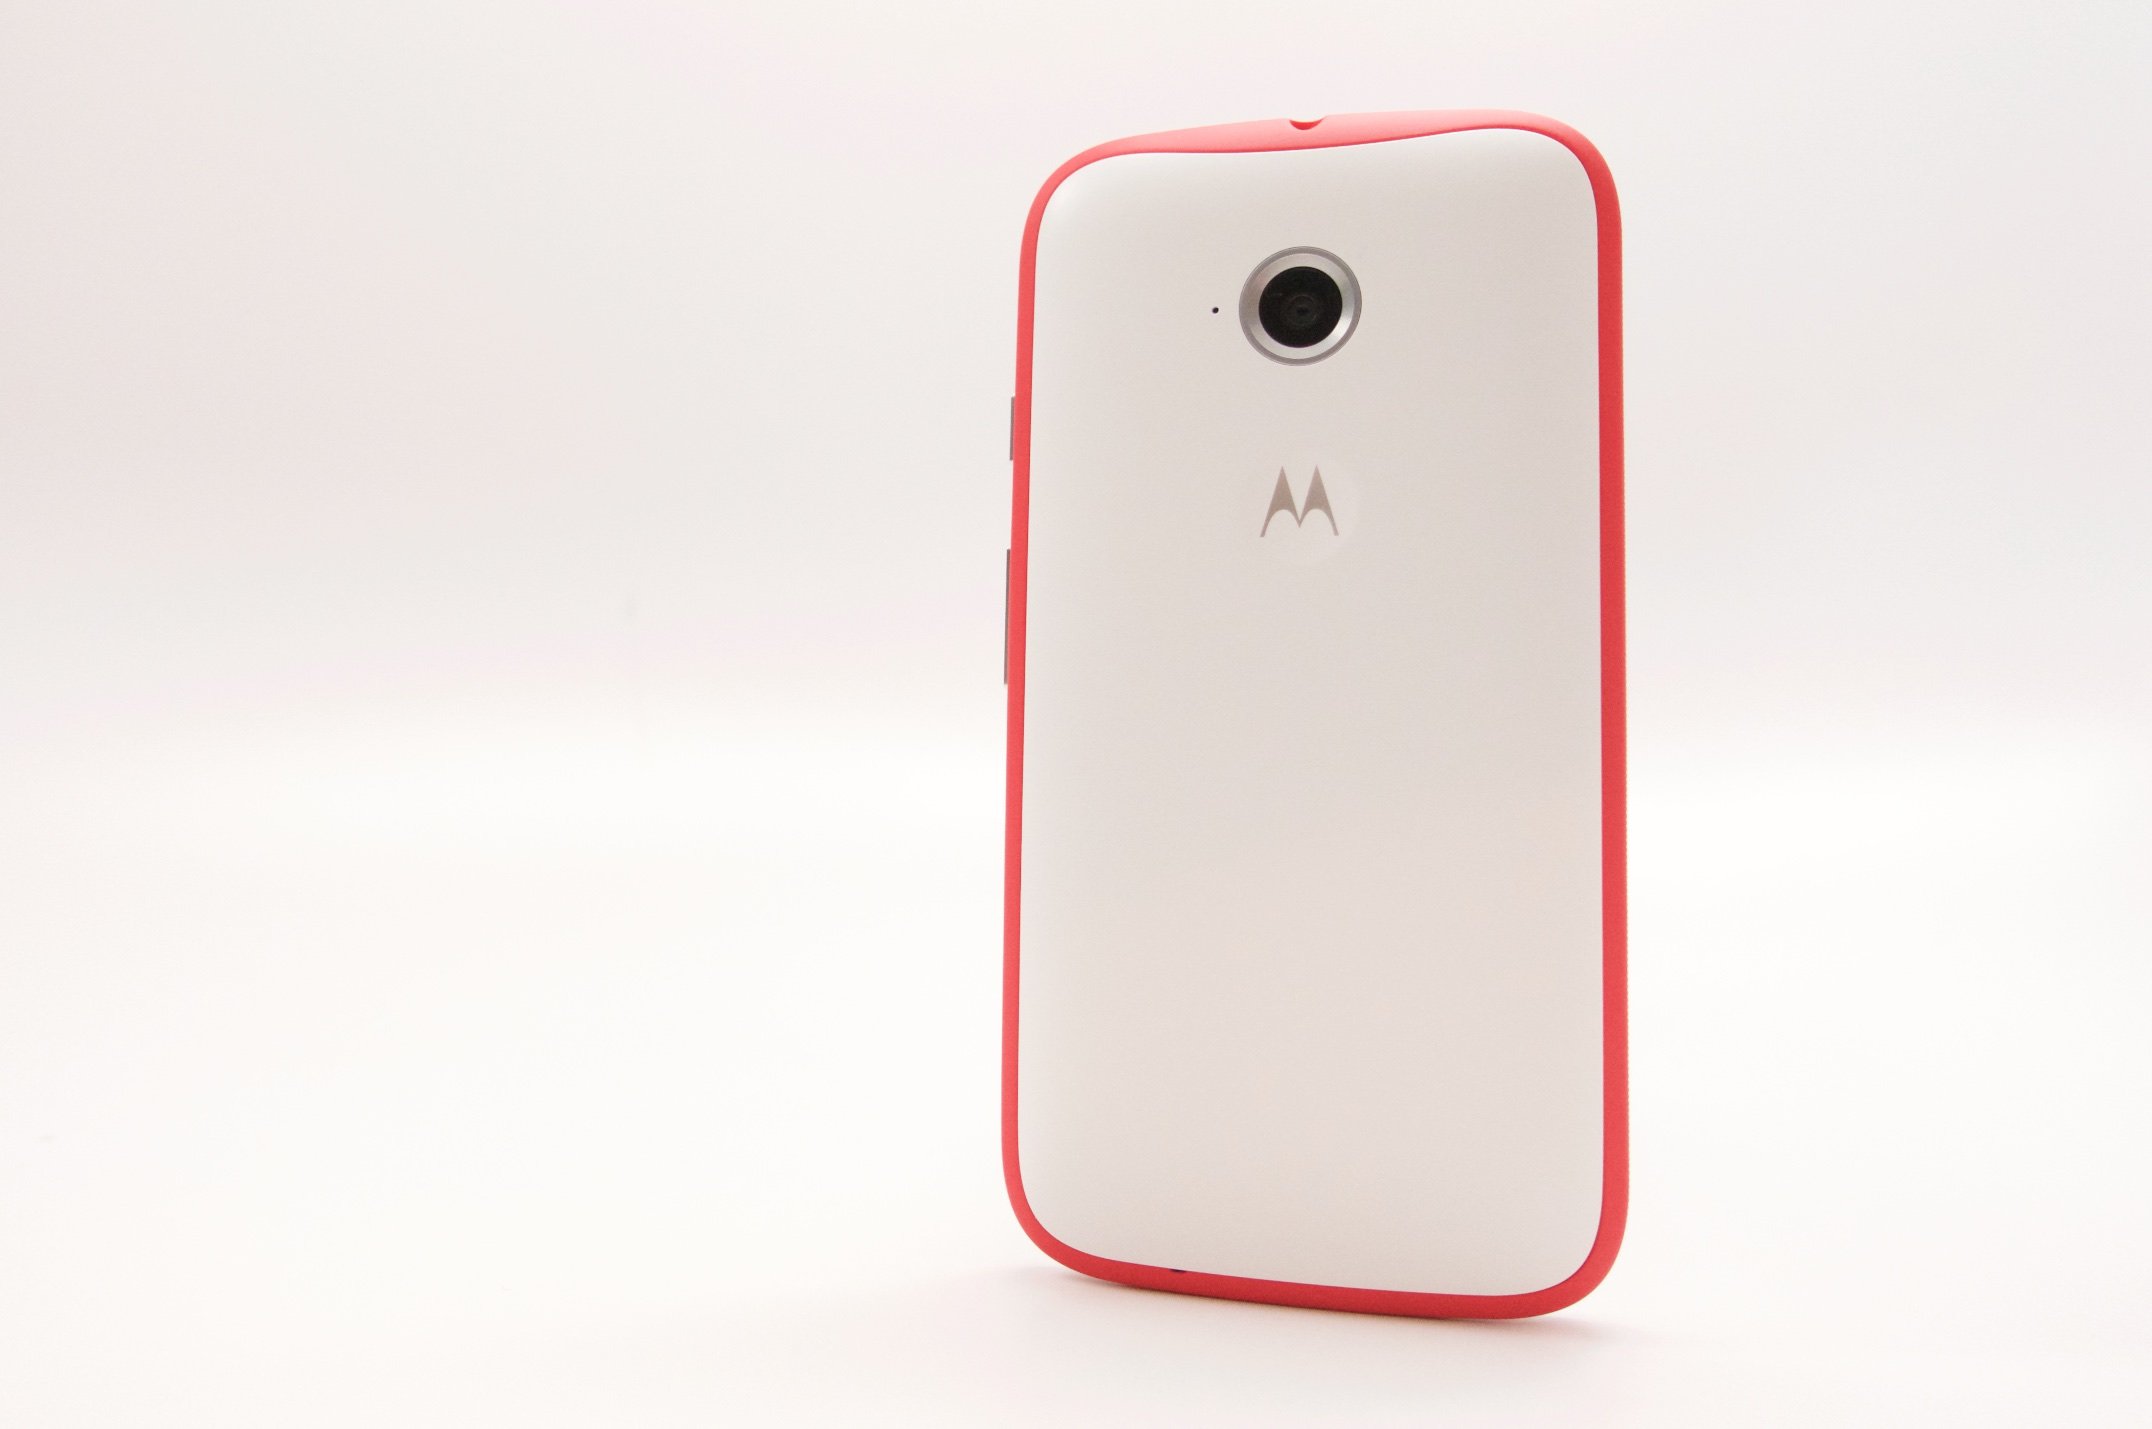 This is the new Moto E 2.